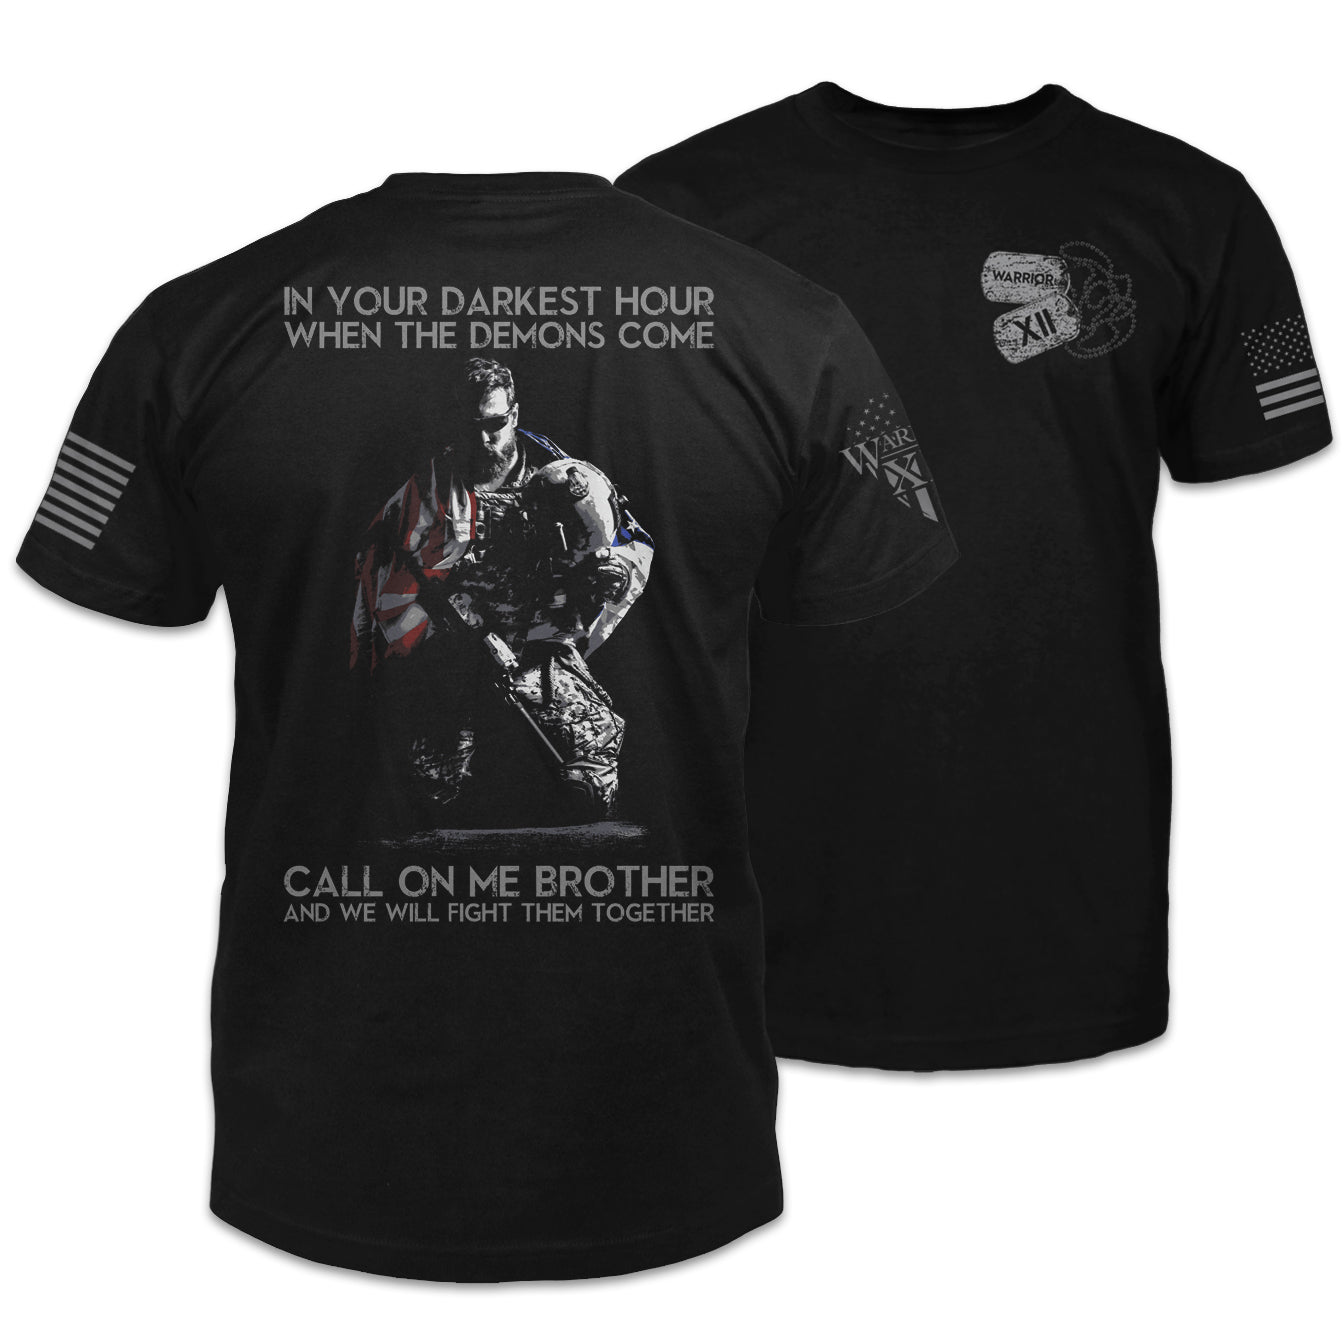 Front & back black t-shirt with the words "In your darkest hour when the demons come, call on me, brother, and we will fight them together" with a soldier printed on the shirt.